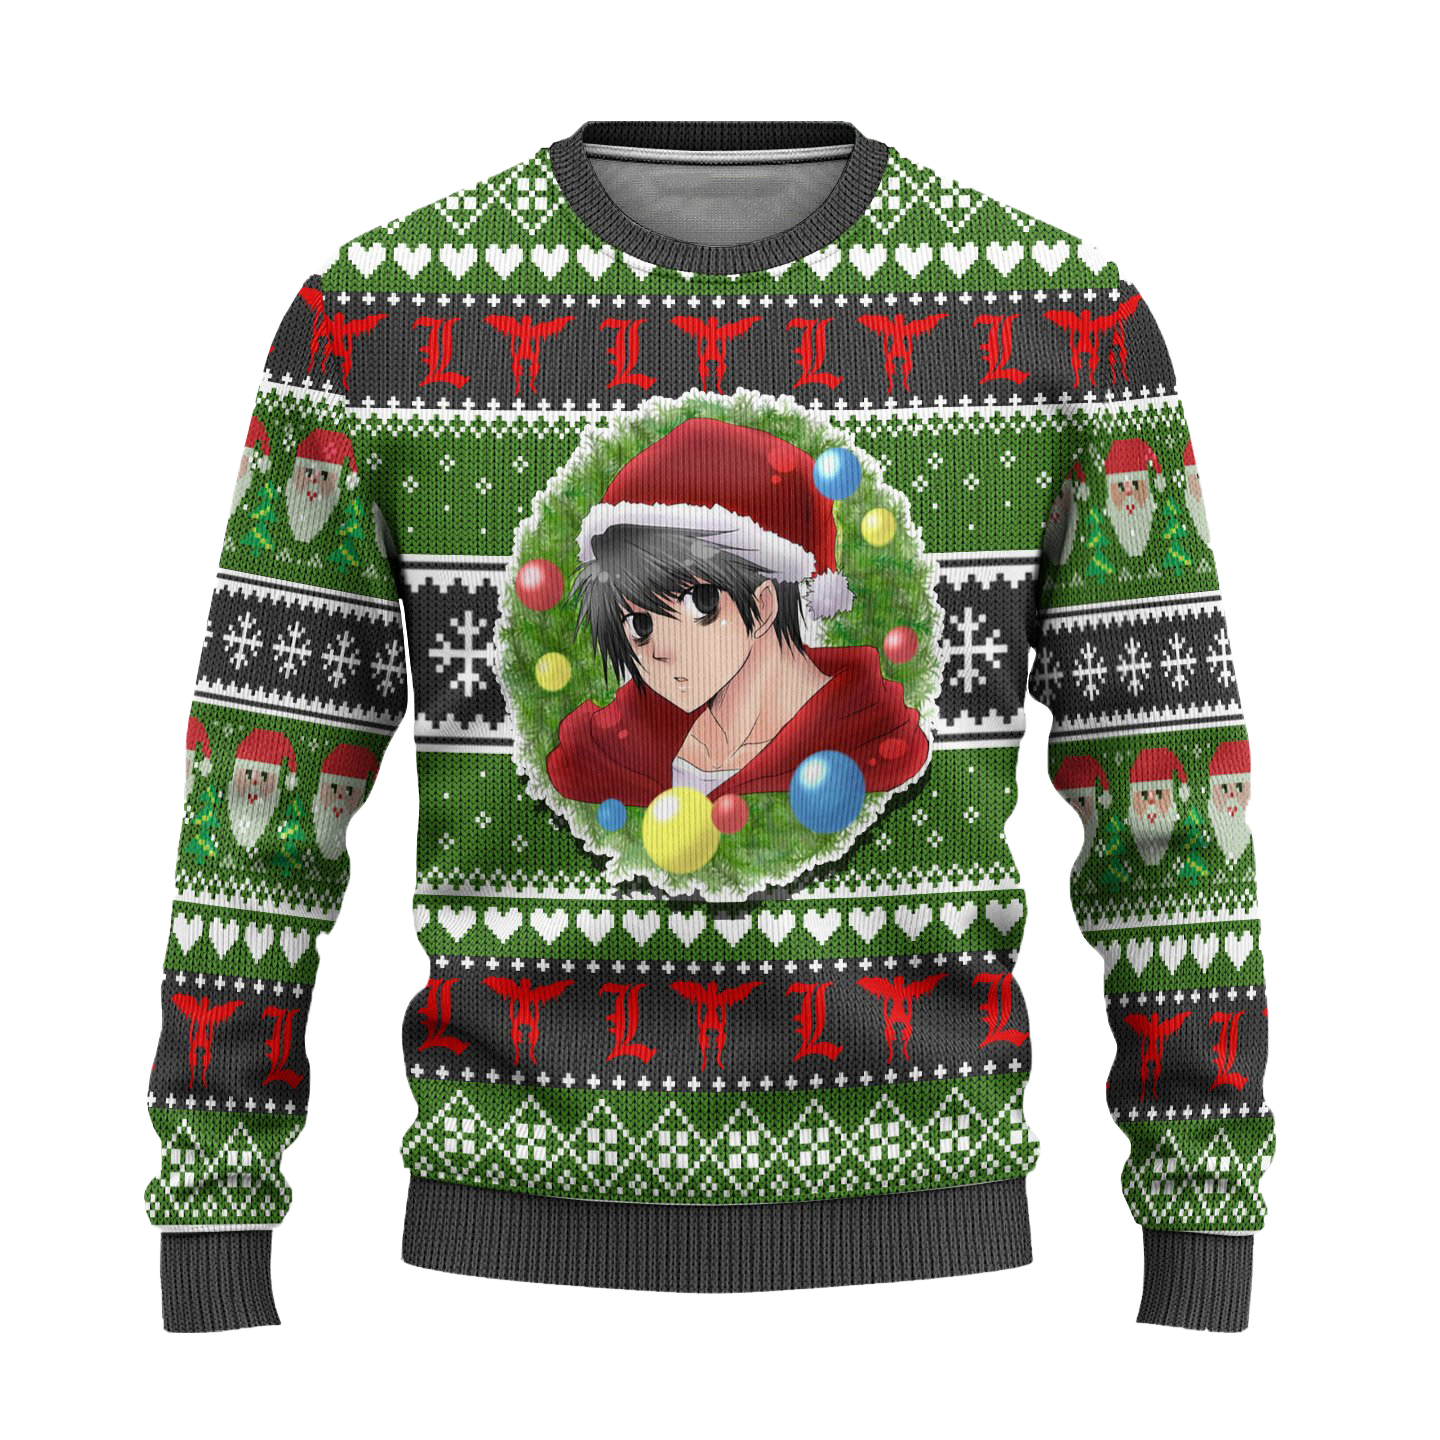 L Lawliet Anime Ugly Christmas Sweater Custom Death Note Xmas Gift